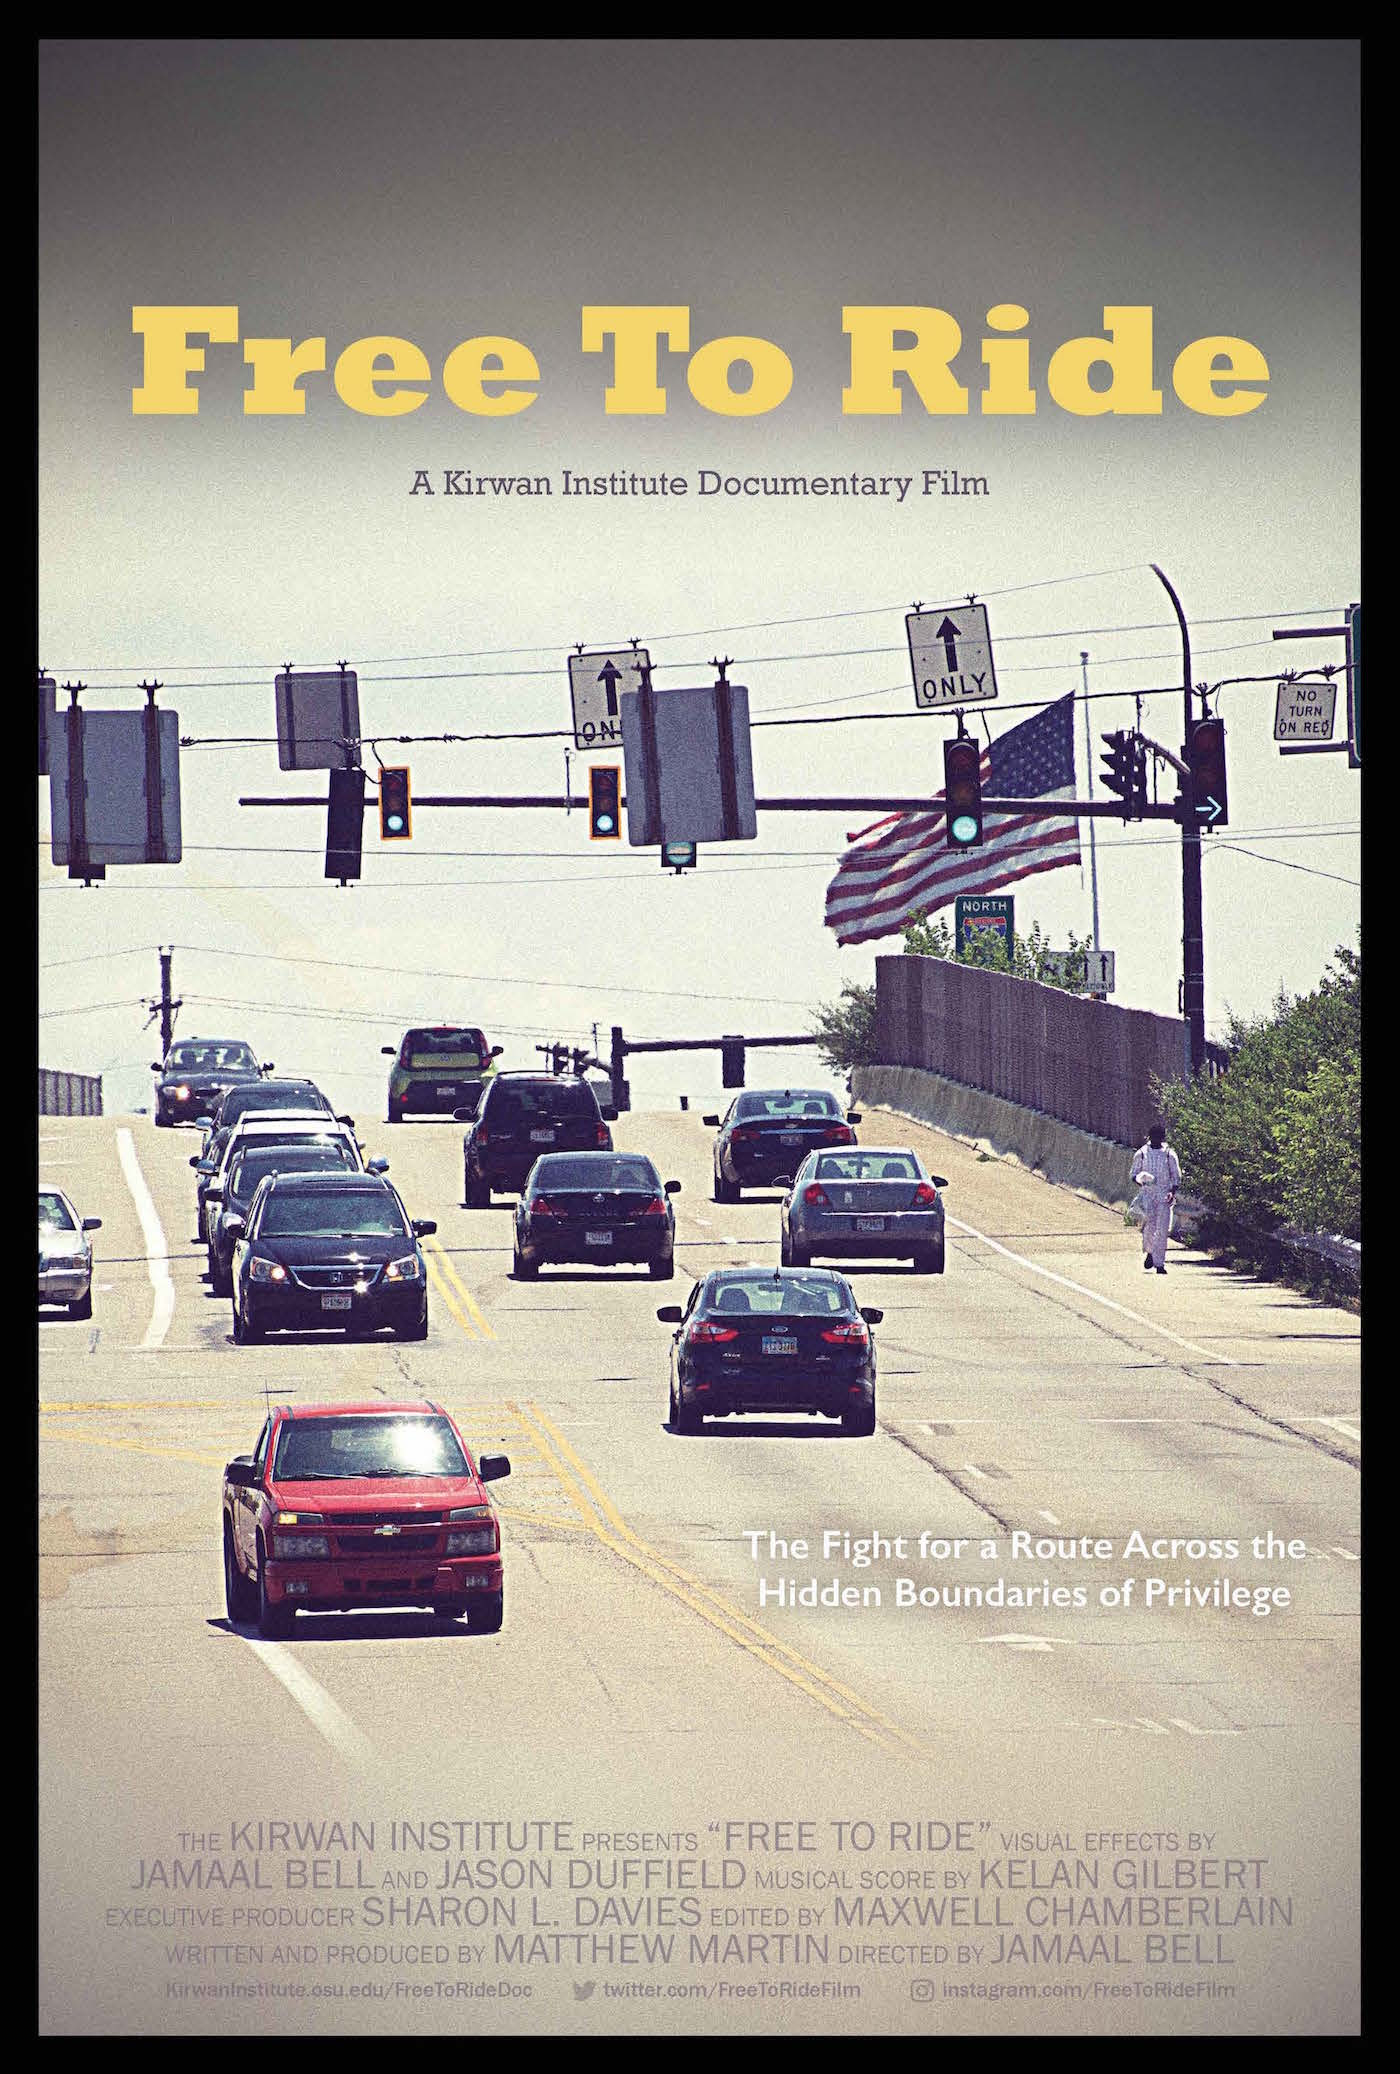 Image for: Free to Ride